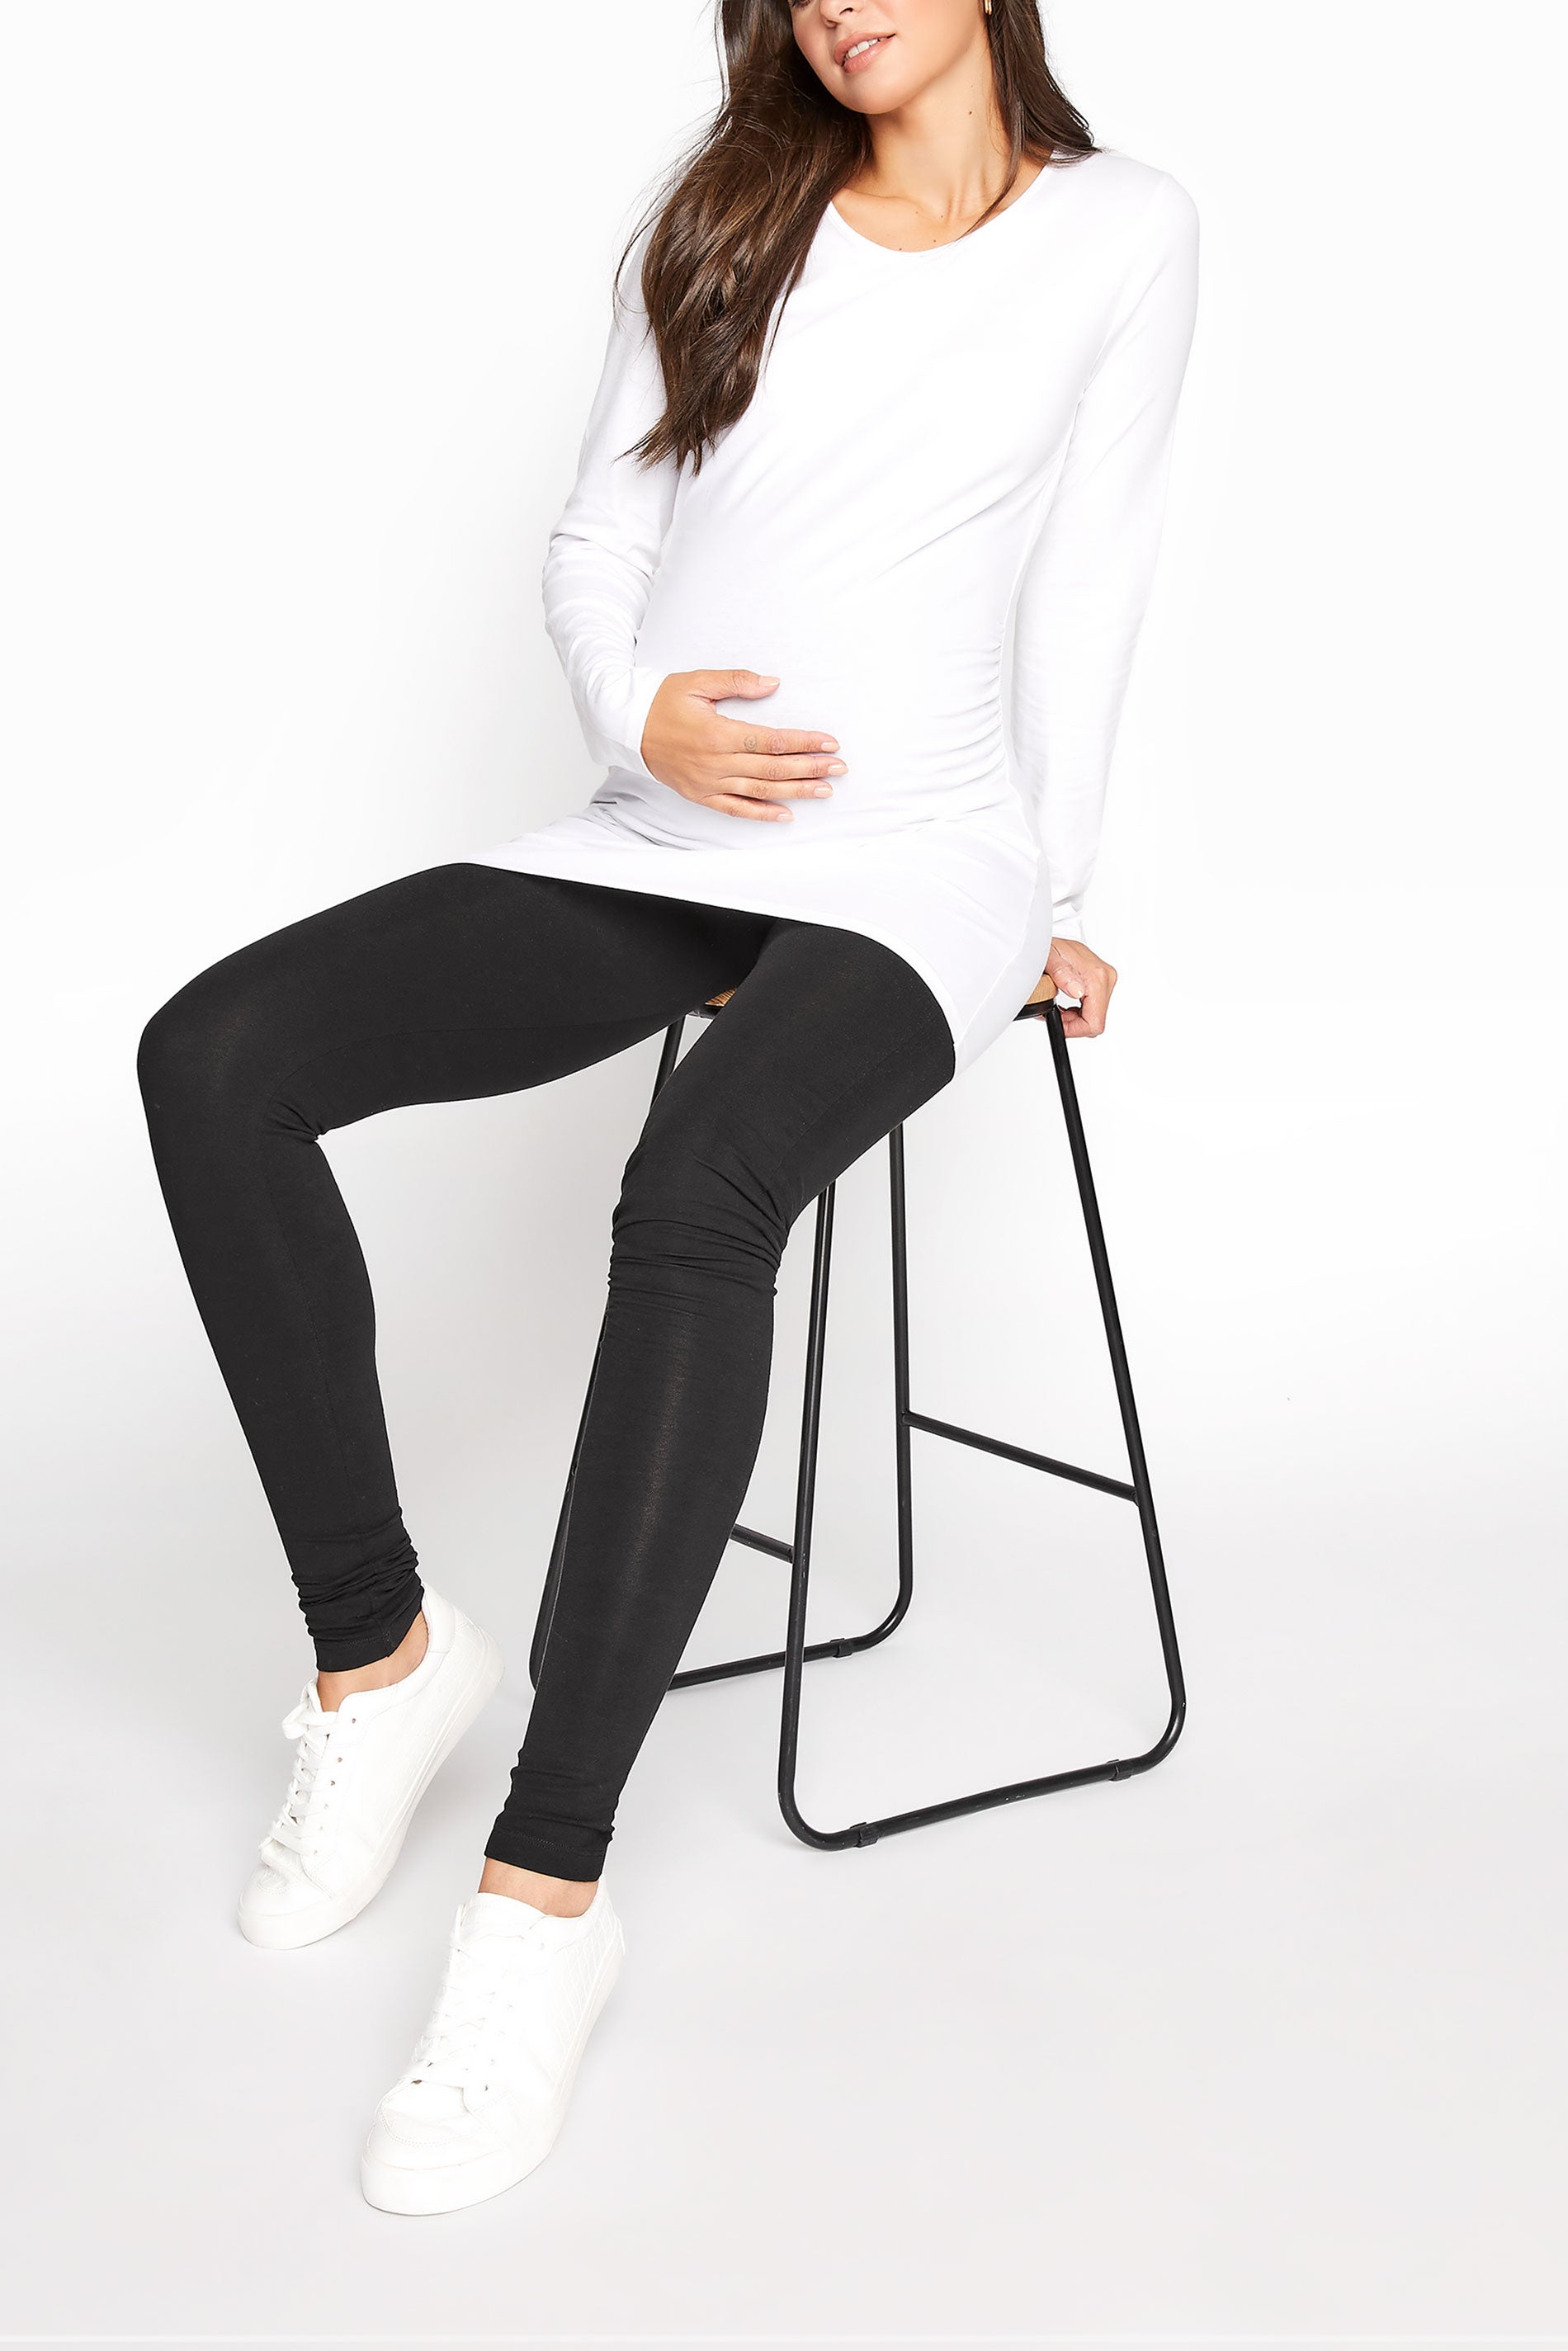 LTS Tall Maternity Black Stretch Cotton Leggings – Search By Inseam